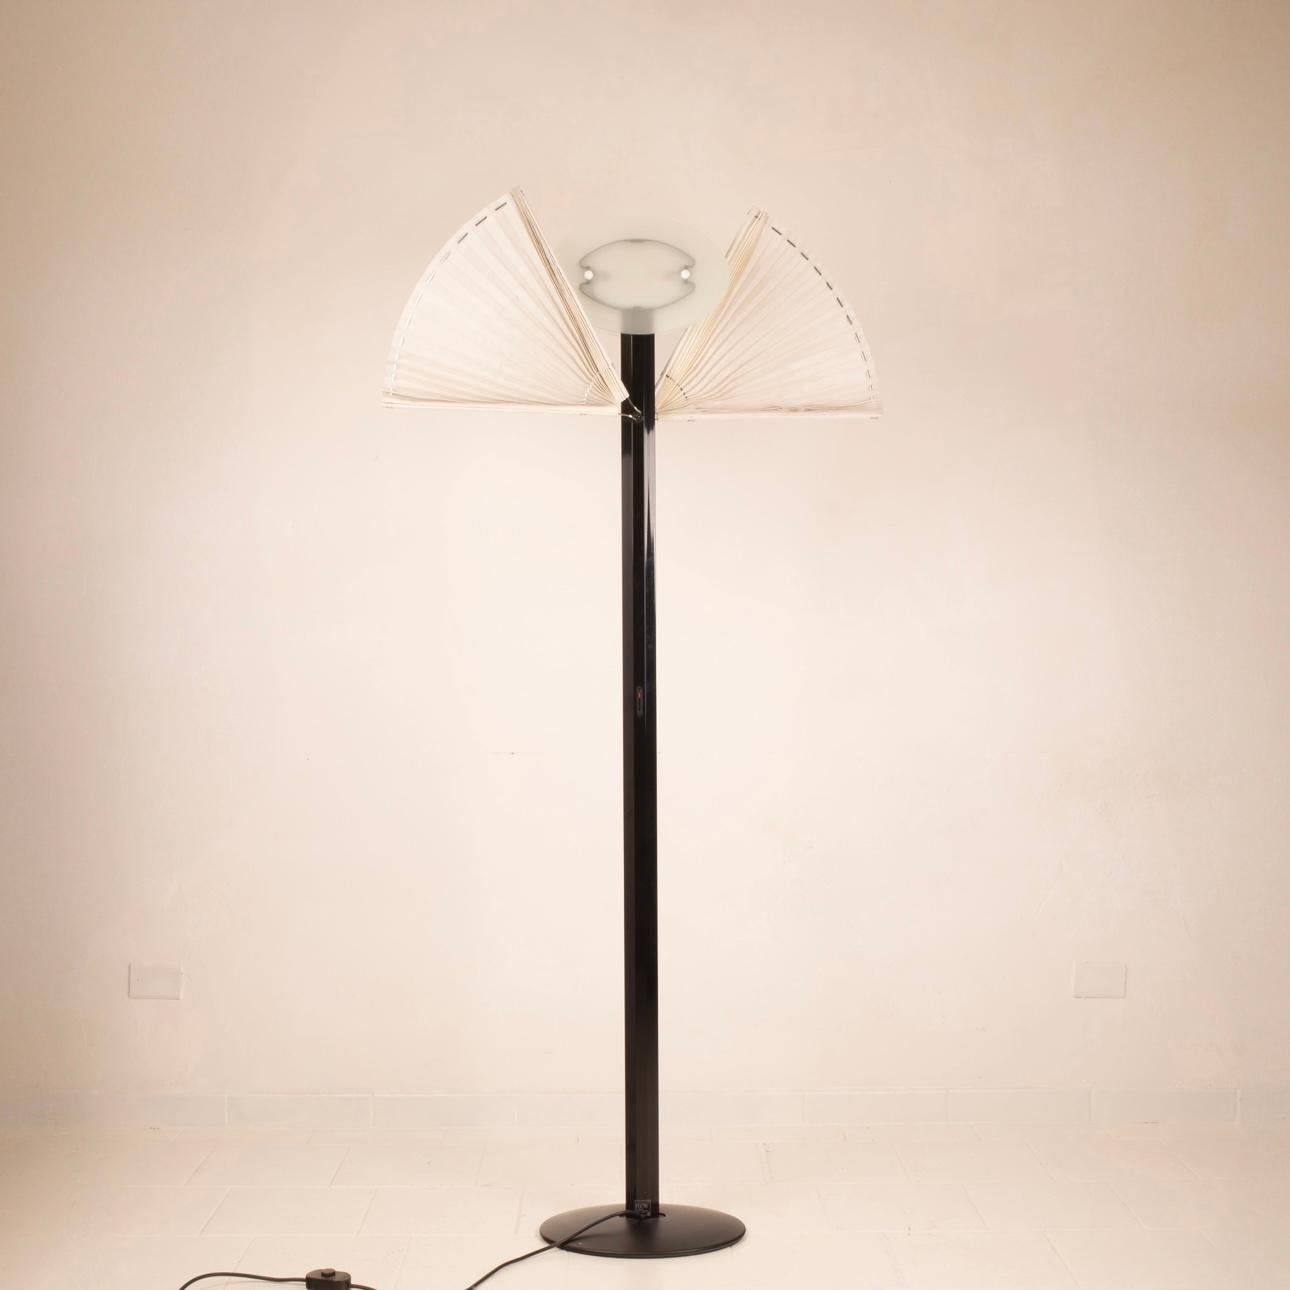 Stunning floor lamp designed by Afra & Tobia Scarpa for the Italian company 